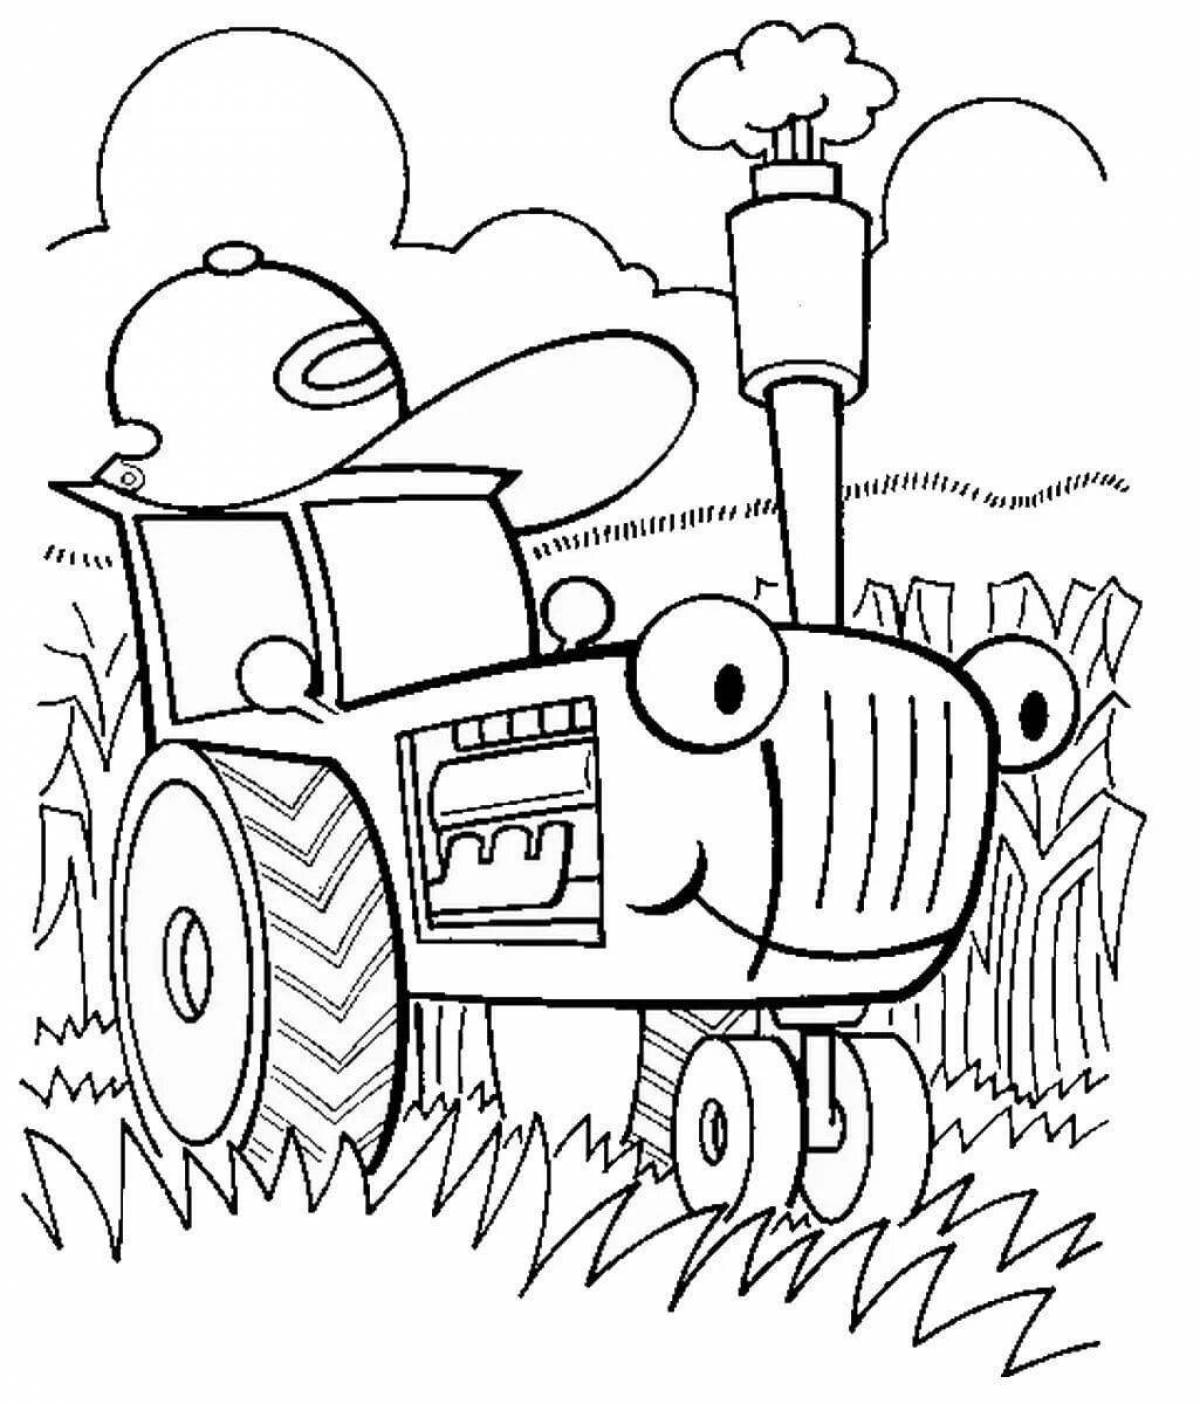 Impressive blue tractor coloring page